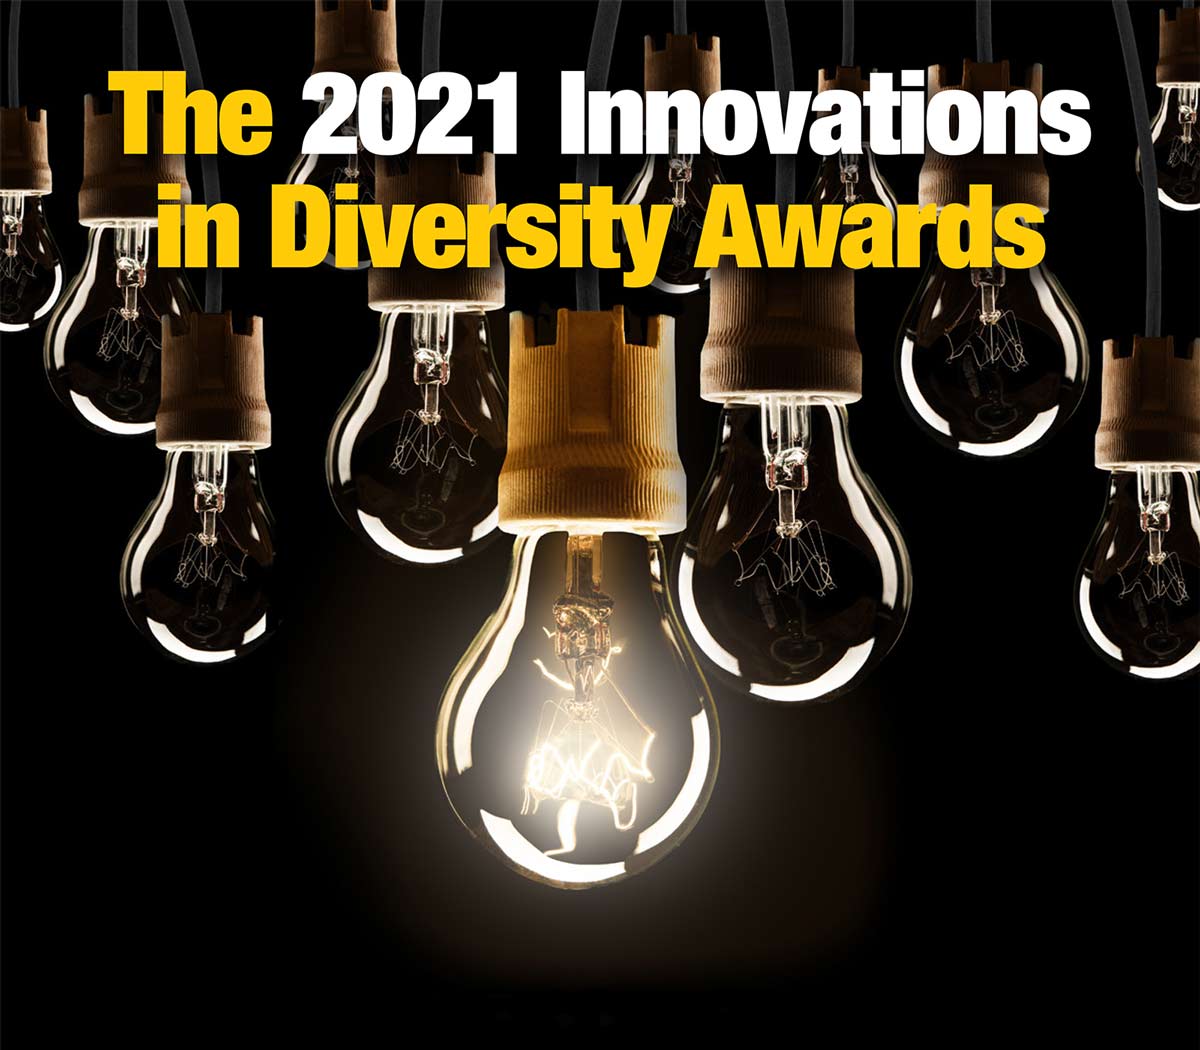 The 2021 Innovations in Diversity Awards